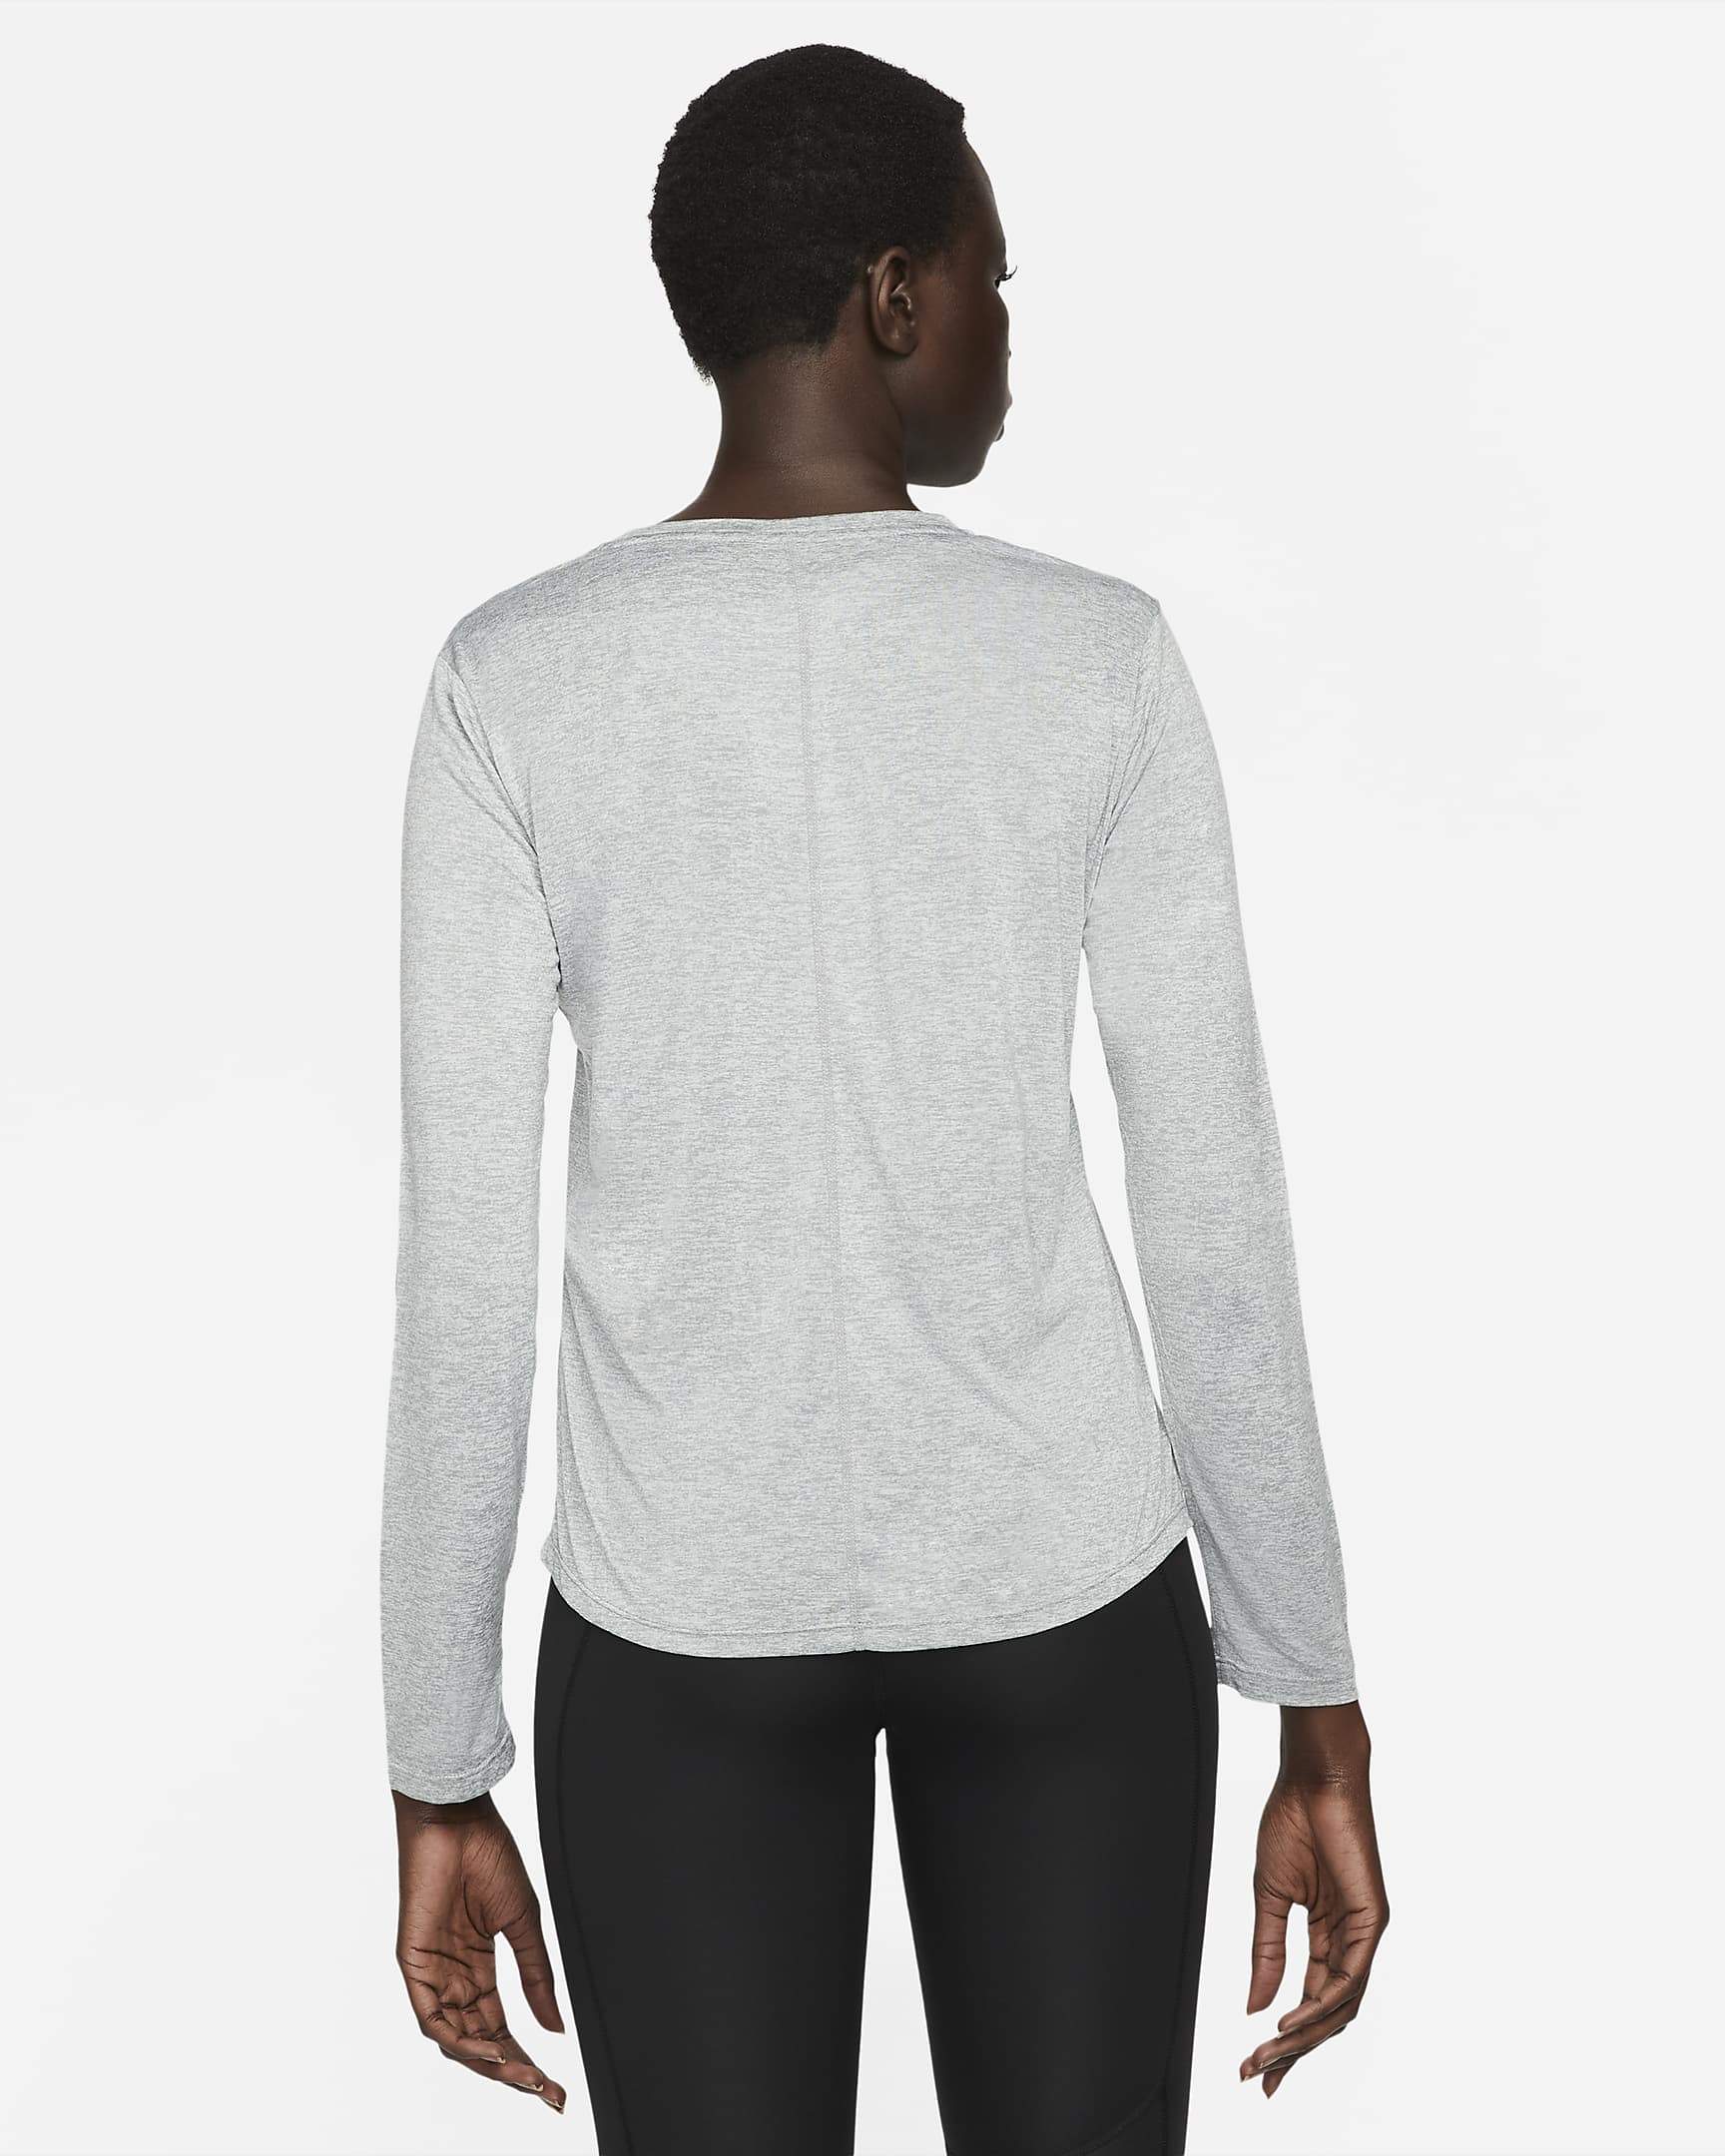 Nike Dri-FIT One Women's Standard Fit Long-Sleeve Top - Particle Grey/Heather/Black